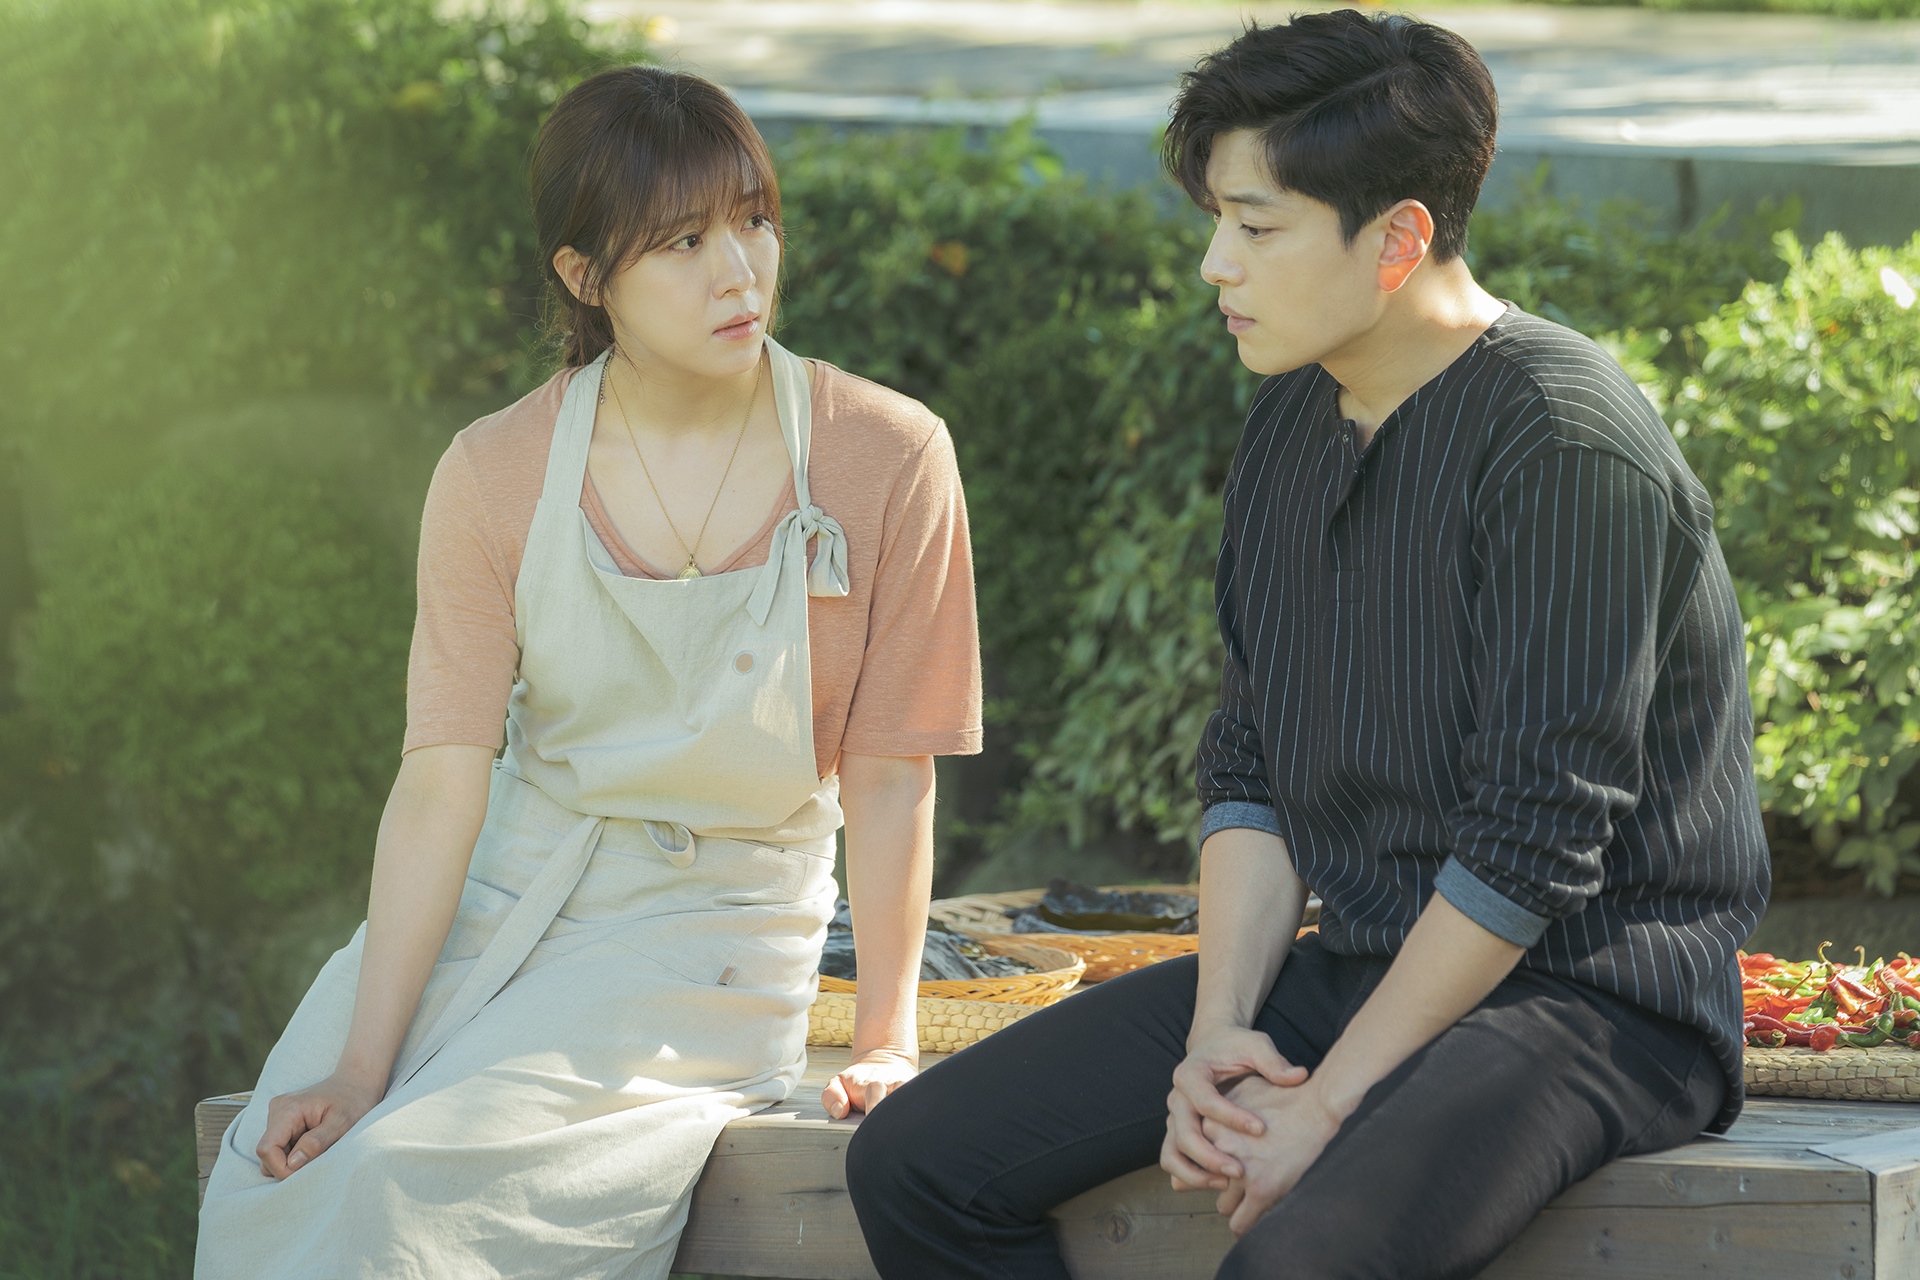 There has been a thrilling change in the streets of Chocolates Yoon Kye-sang and Ha Ji-won.JTBC gilt drama Chocolate (directed by Lee Hyung-min, playwright Lee Kyung-hee, production drama House and JYP Pictures) released the romantic eye contact of Yi Gang (Yoon Kye-sang) and Moon Cha-young (Ha Ji-won) on the 28th, raising the thrilling index.Here, Lee Joon (Jang Seung-jo), who sits side by side, captures the image of Lee Gang looking at Moon Cha-young, and amplifies their curiosity about their relationship change.Chocolate, which conveys warm comfort and sympathy with its delicateness and deep insight into life that captures the texture of emotions, opened its second act on the 9th broadcast on the 27th.While Lee Kang was aware of the attraction toward Moon Cha-young, the feelings of the two people that have been accumulated have begun to deepen and have made a sad feeling.Lee Joon, who was staying in a giant hospice as a community service here, was stimulating the Jealousness of the river.Lee Joons appearance raised expectations about what variables will affect the romance of Lee Kang and Moon Cha Young, who realized their hearts.The romantic eye contact between Lee Gang and Moon Cha-young in the photo released on the day is more intense than ever before.A single step still exists between the two, but the eyes that look at each other are deep.The deep eyes of Lee and Moon Cha-young, who look at each other, seem to leak out hearts that they can not convey. Moon Cha-young and Lee Joon are also closer.It is sweet to sit side by side and listen to each others stories, and it makes me wonder about the relationship change of the three people in the complex face of the river that can not approach and watch.Lee Kangs fate rival Lee Joon appeared to accelerate the feelings of Lee Kang and Moon Cha Young.The production team of Chocolate said, With the beginning of the second act, the sweet and sour romance of Lee Kang and Moon Cha Young also changed in earnest.Im aware of my mind, but I want you to expect how Lee Gang, who is not getting close to me, will approach Moon Cha-young.On the other hand, netizens are going to be happy with Yoon Kye-sang is so cool and so happy with Cha Young-yi, I am so excited about the charm of Yoon Kye-sang and waiting for gold and vomit, I am so good at acting and heartbeatI feel so sorry for the 16-episode series. Today (28th) is broadcast 10:50 p.m.iMBC Kim Hye-young  Photo Drama House, JYP Pictures